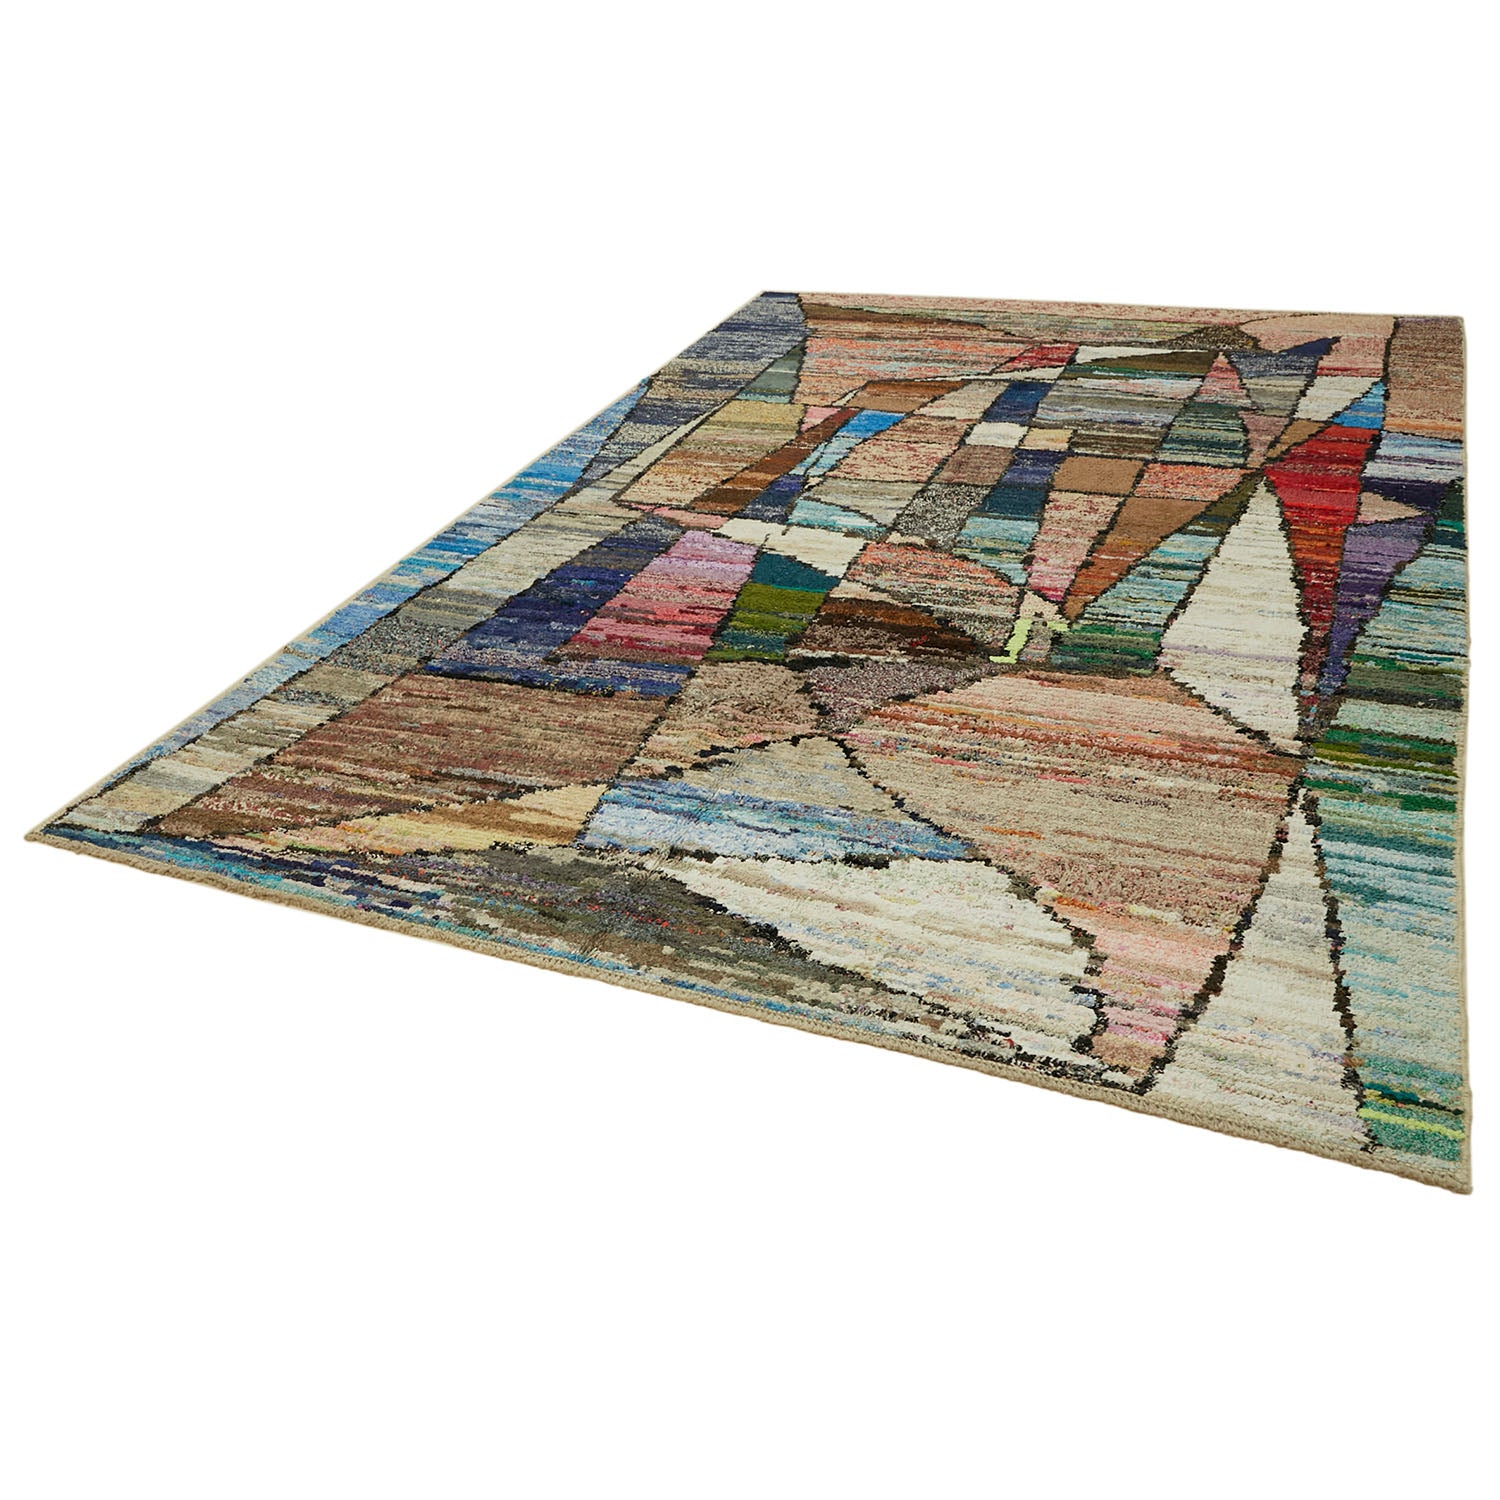 Colorful geometric rug with modern abstract design on plain surface.